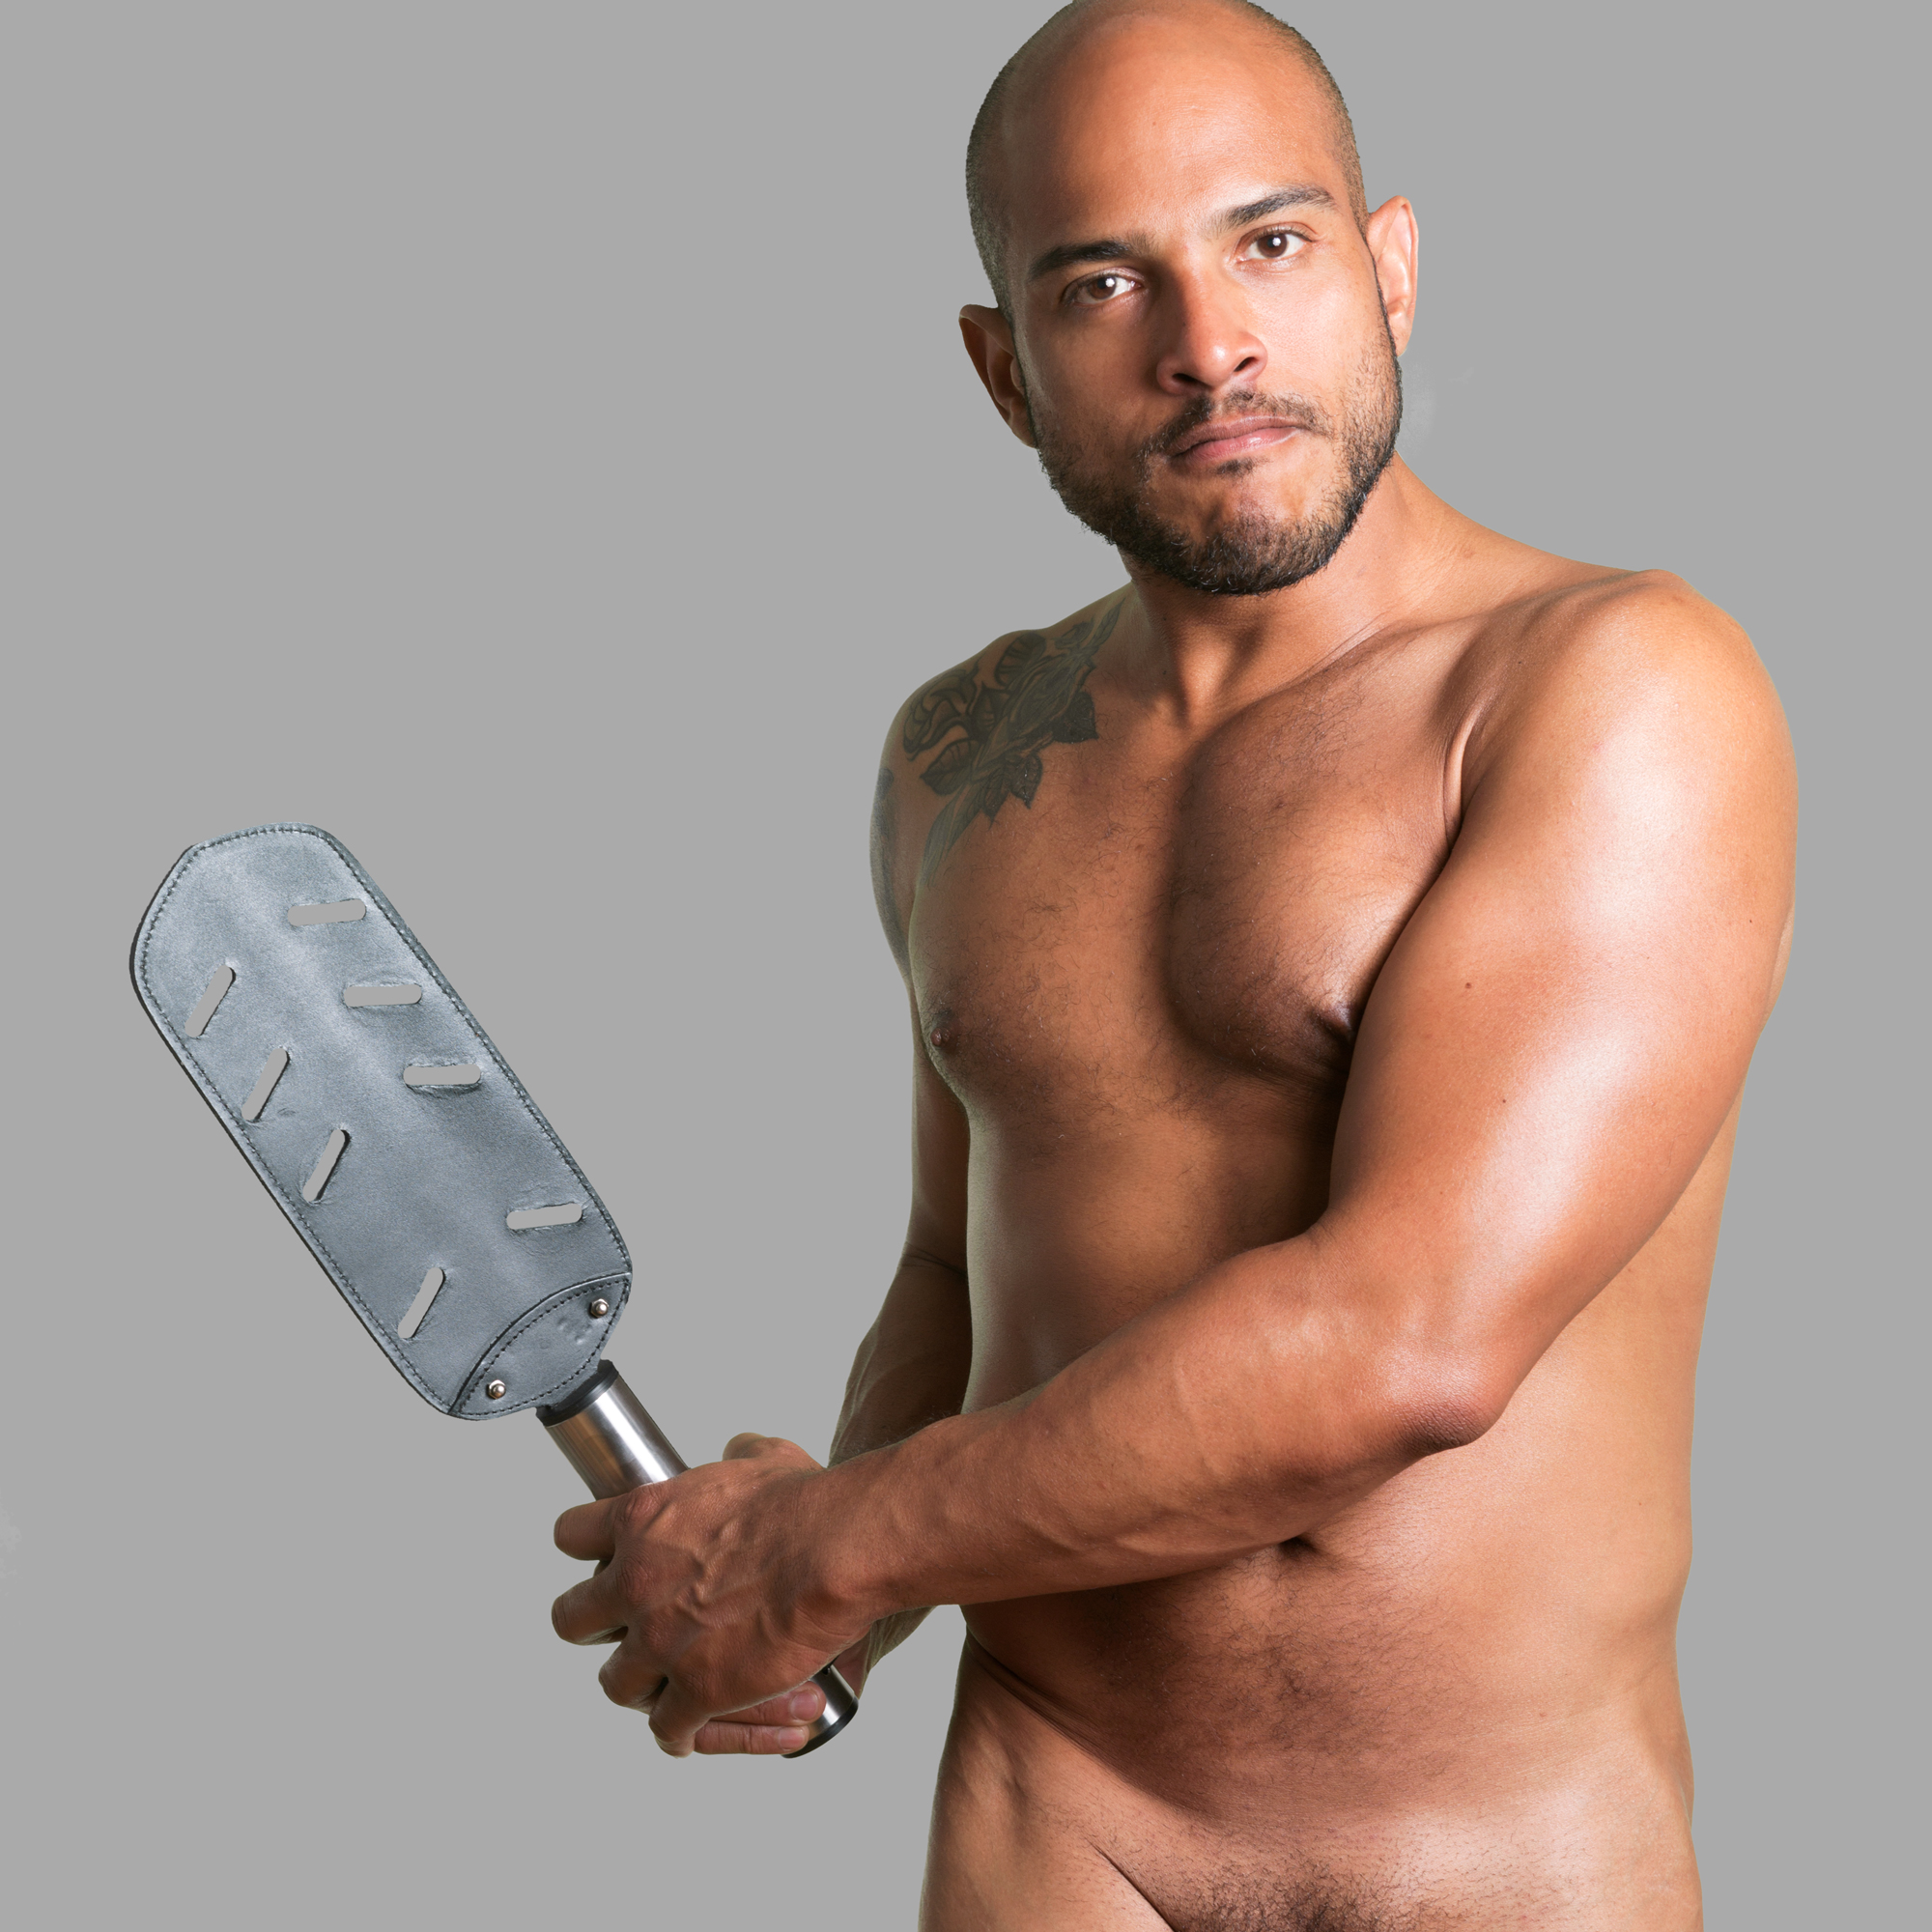 Buy Leather BDSM Paddle from MEO